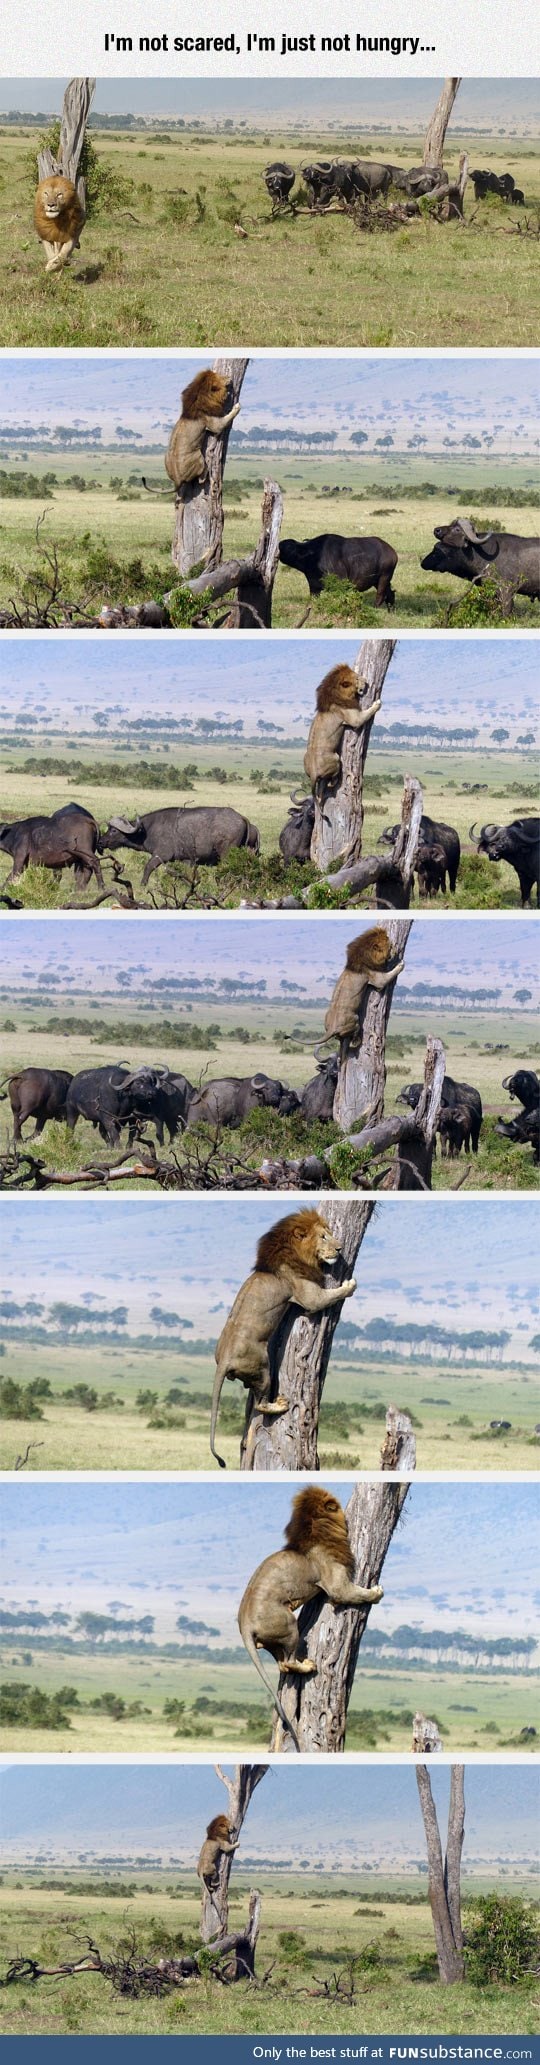 Lion gets in trouble